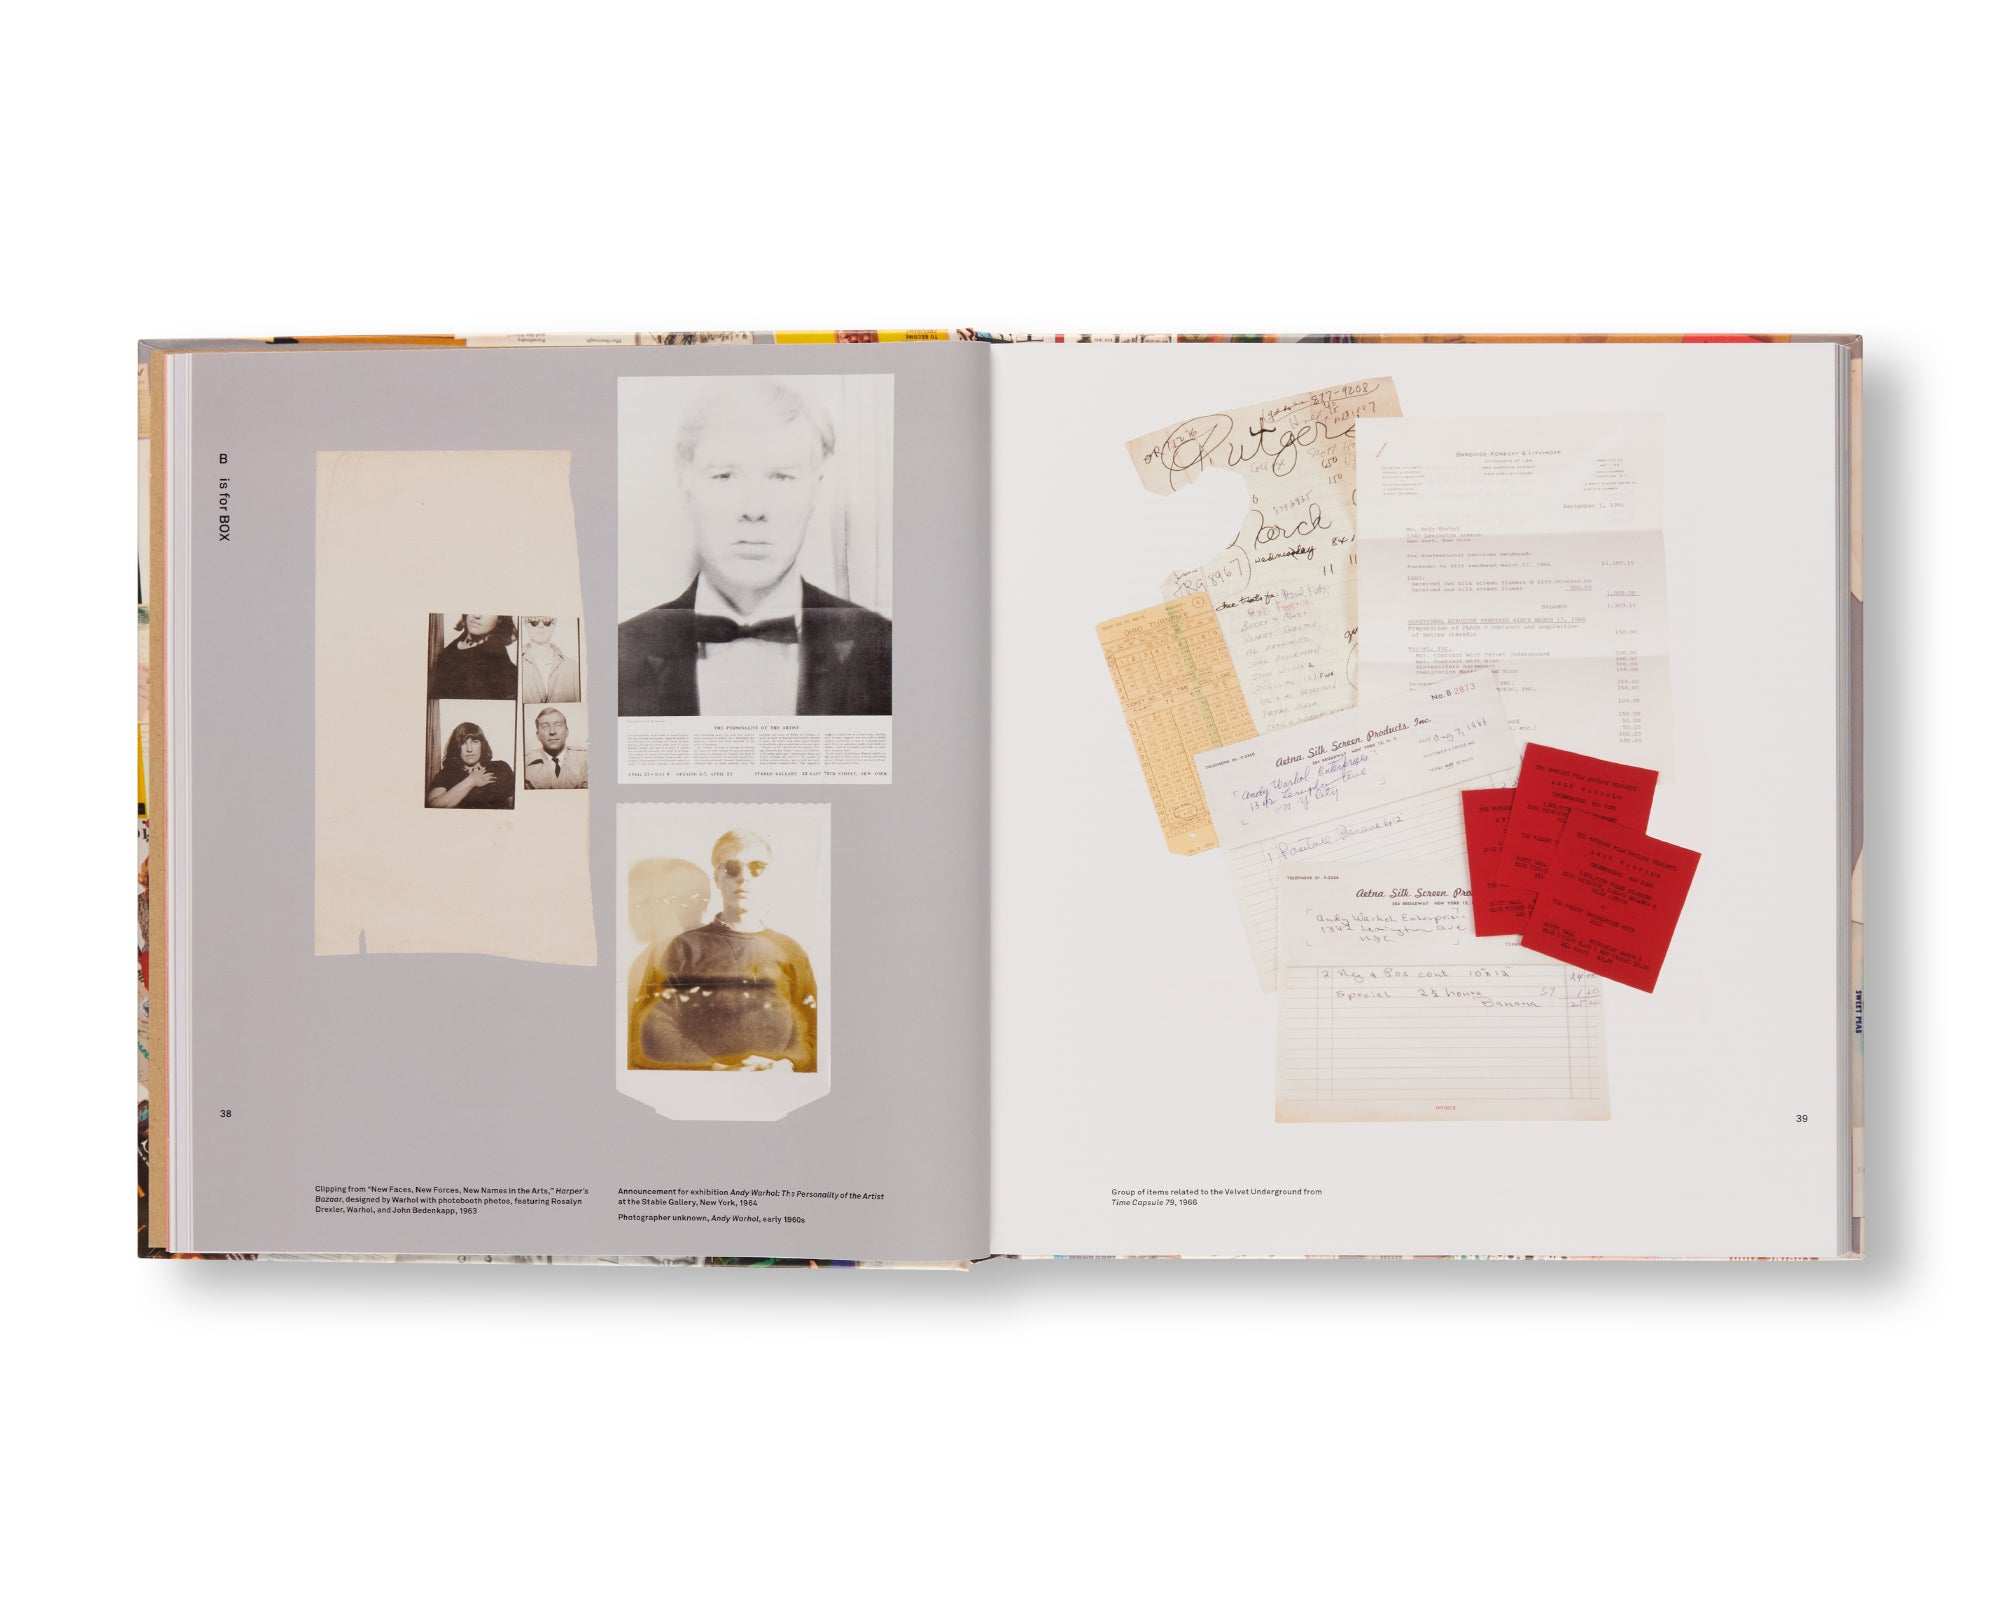 A IS FOR ARCHIVE - WARHOL'S WORLD FROM A TO Z by Andy Warhol